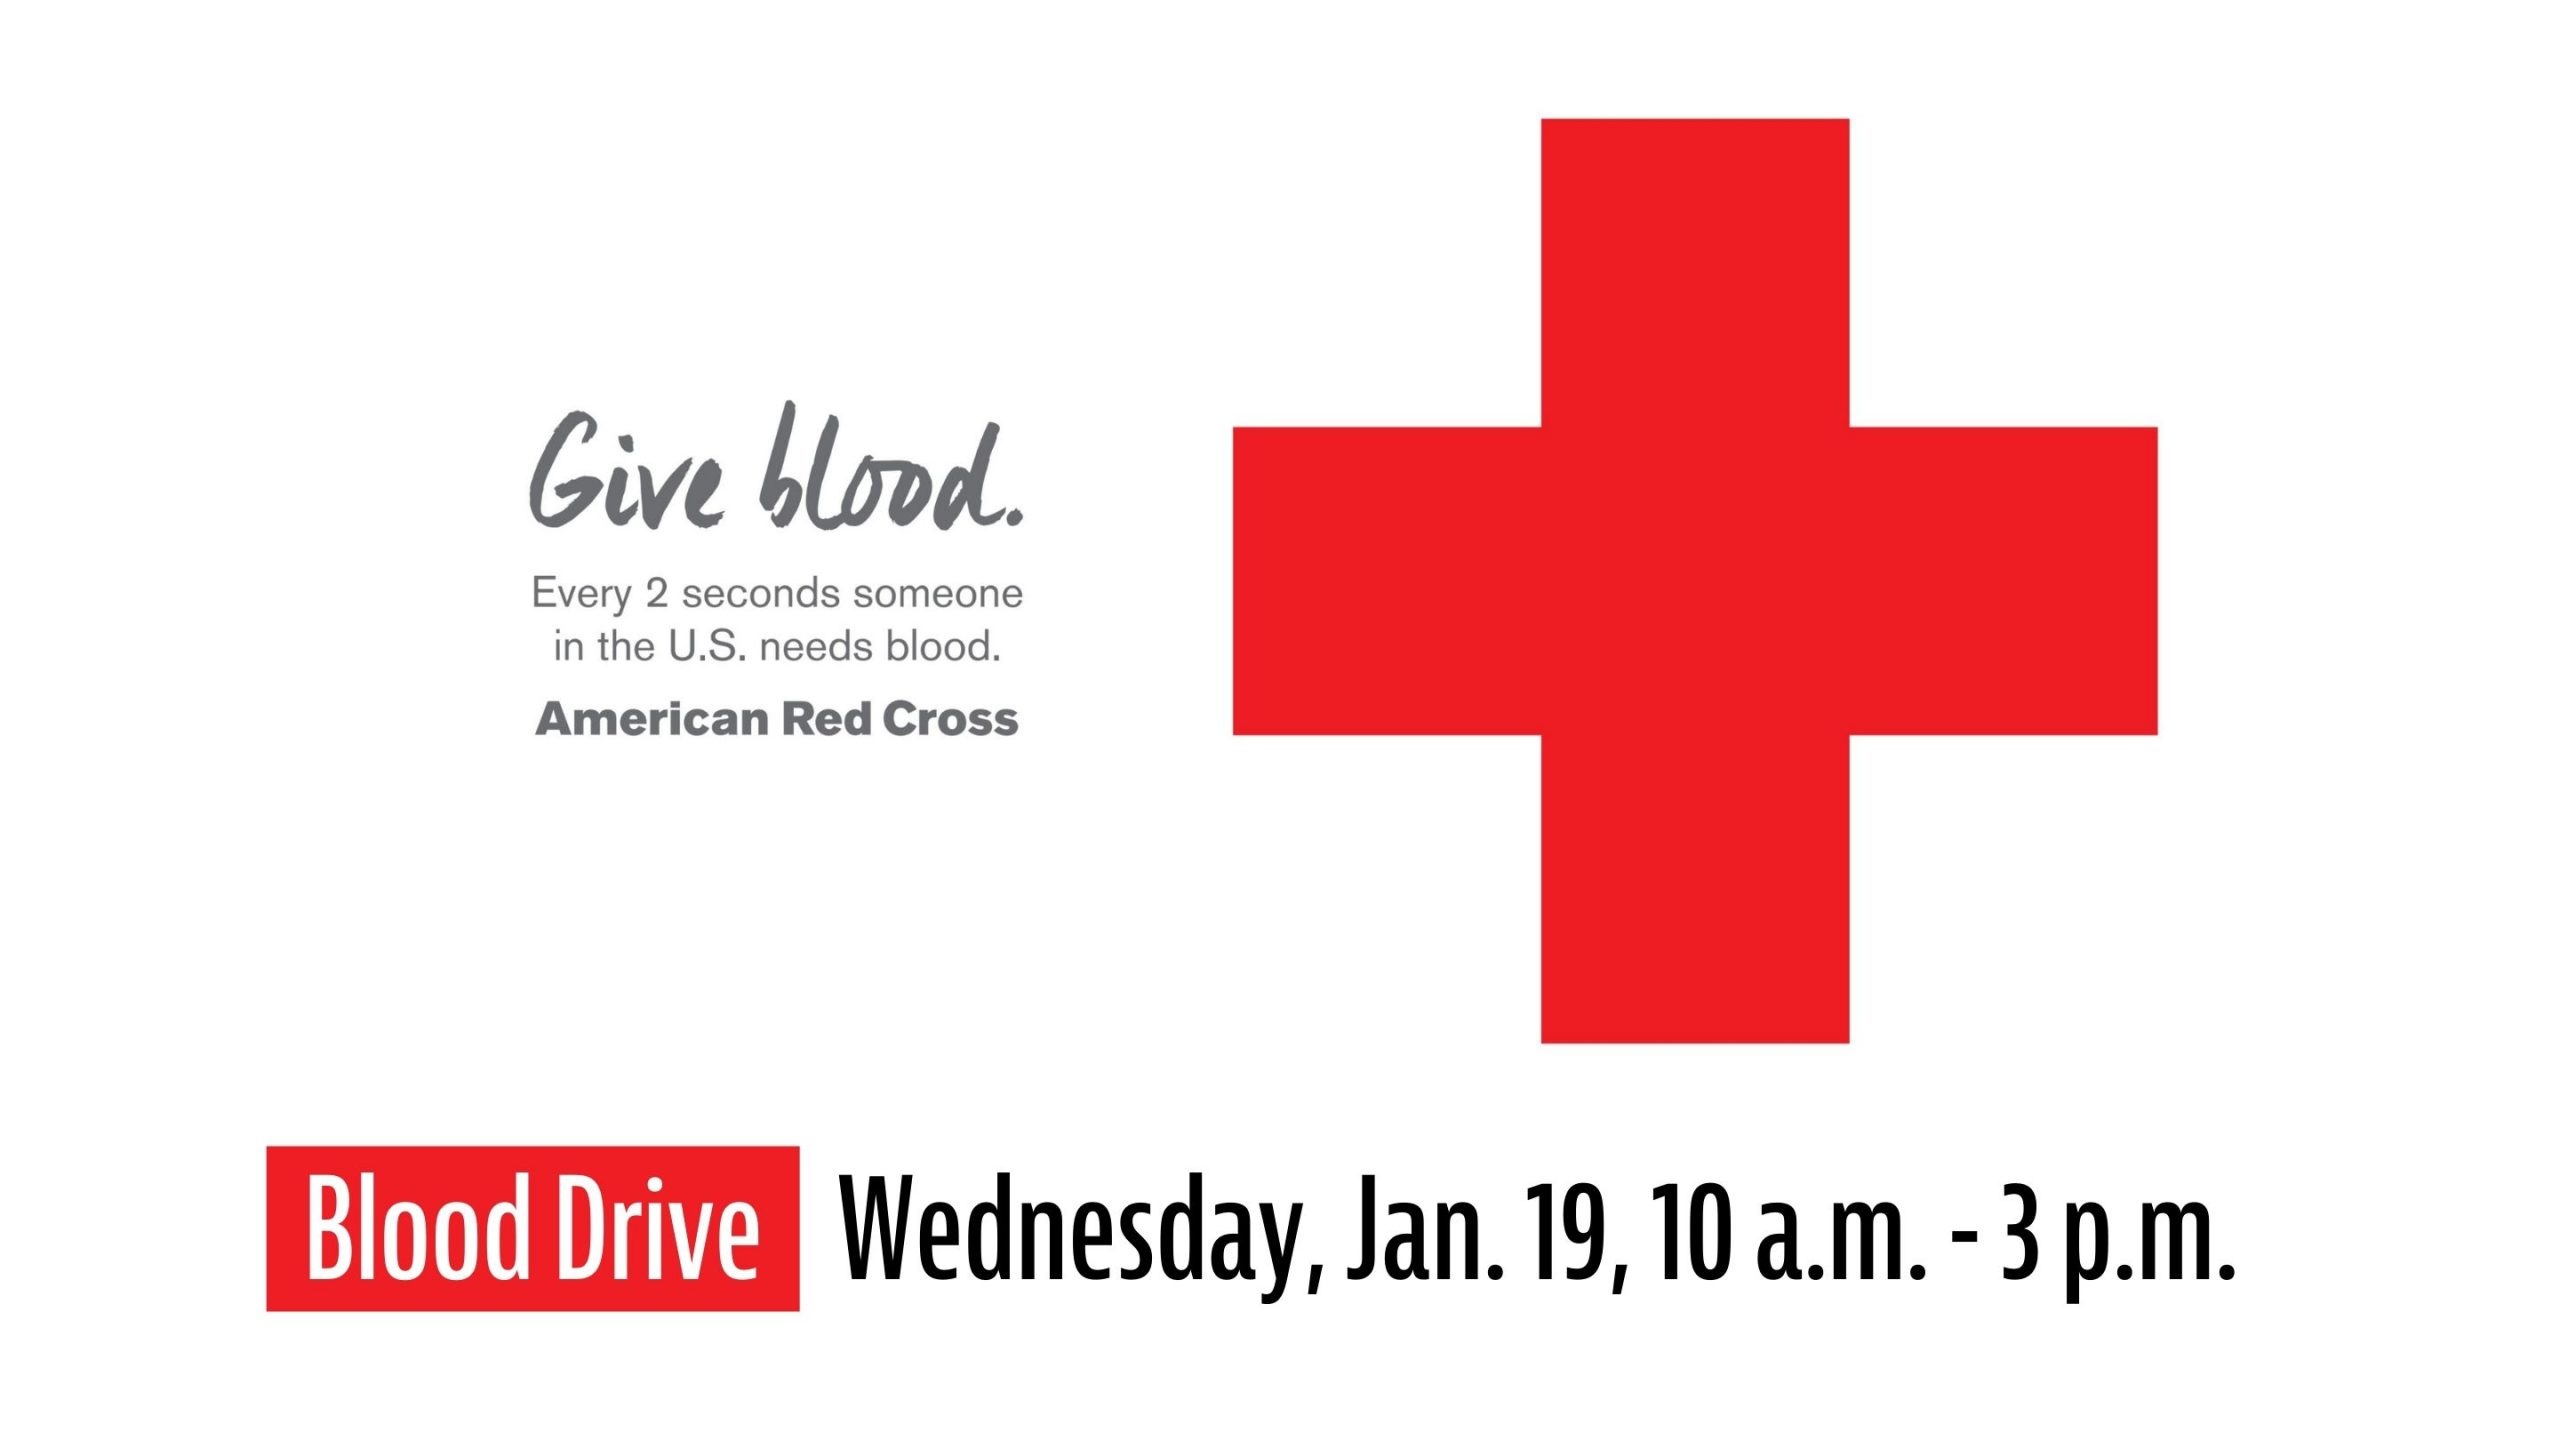 Give Blood. Every 2 seconds someone in the U.S. needs blood. American Red Cross